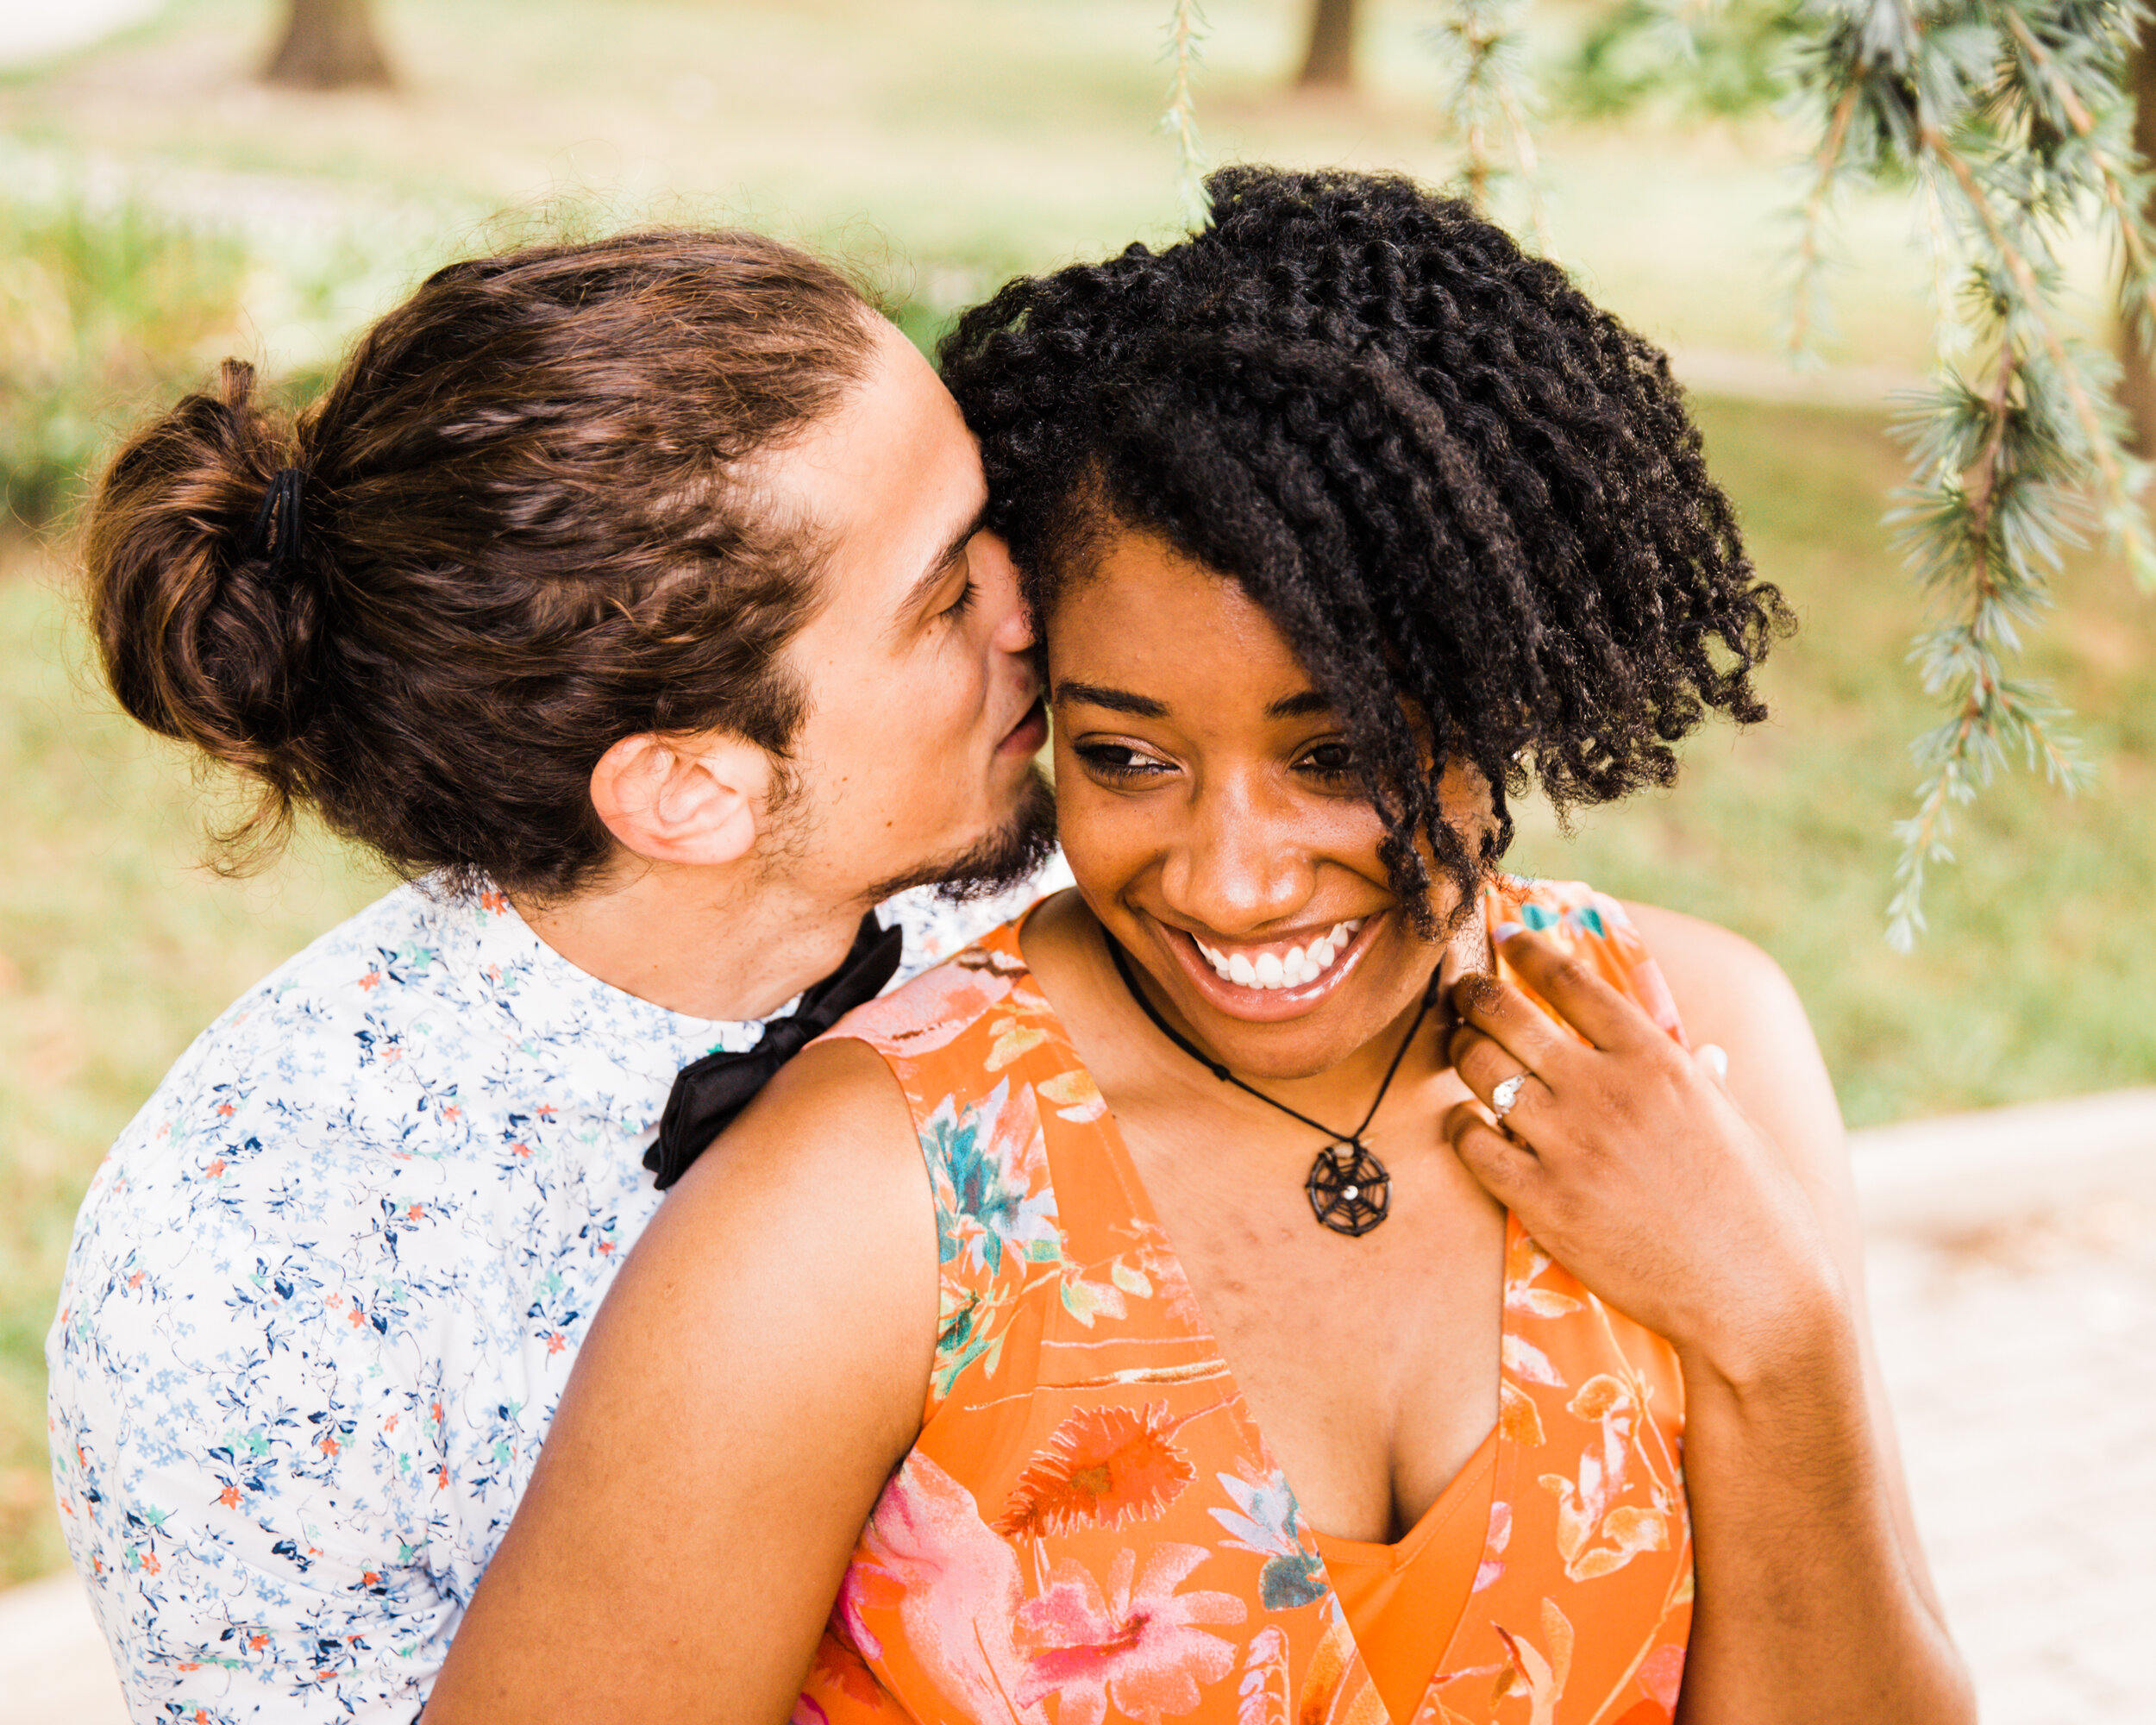 Golden Hour Engagement Session in Baltimore Maryland Patterson Park Pagoda DC Wedding Photographers Megapixels Media Photography and Videography Mixed Couple Multiracial Bride and Groom-14.jpg